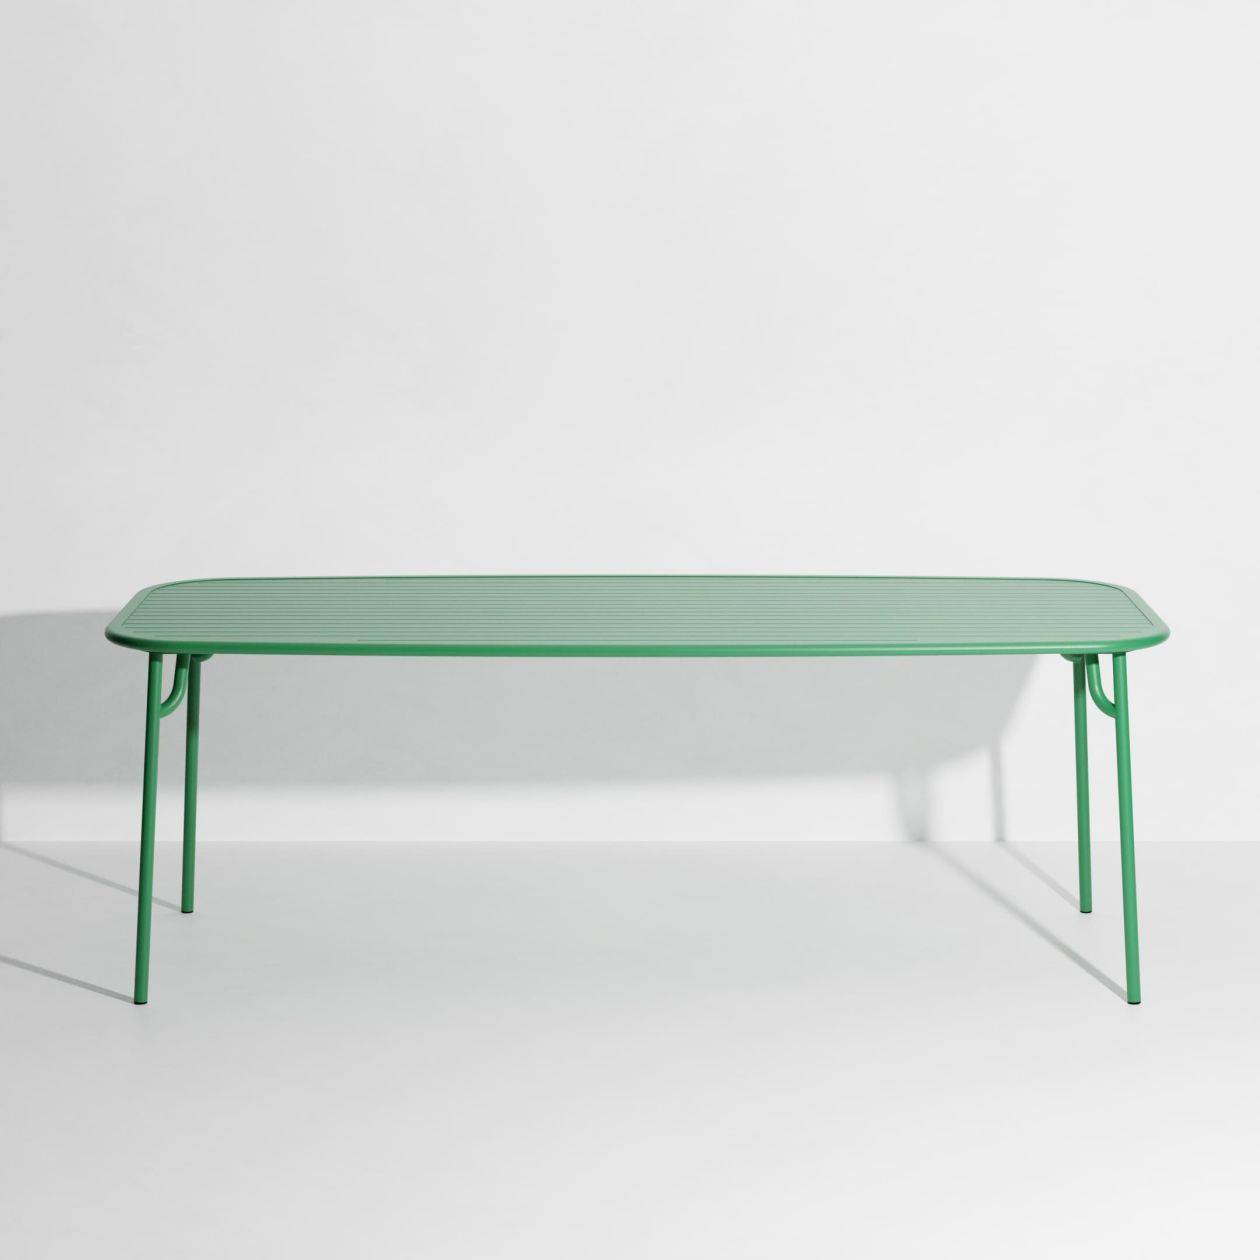 Week-End Large Rectangular Dining Table with slats - Mint green